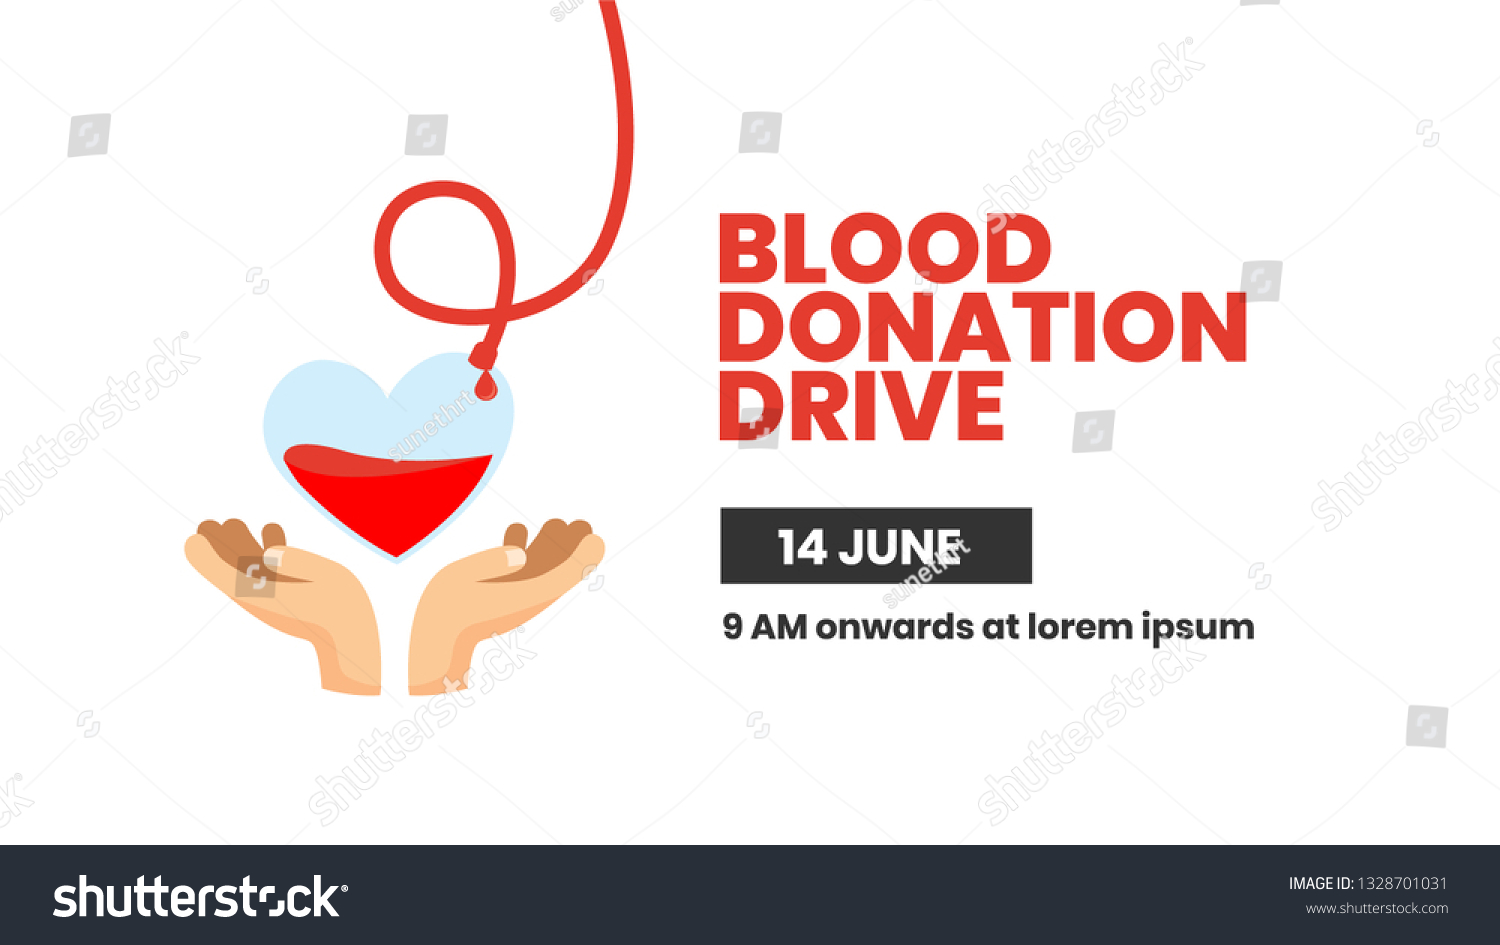 Blood Donation Drive Poster Design